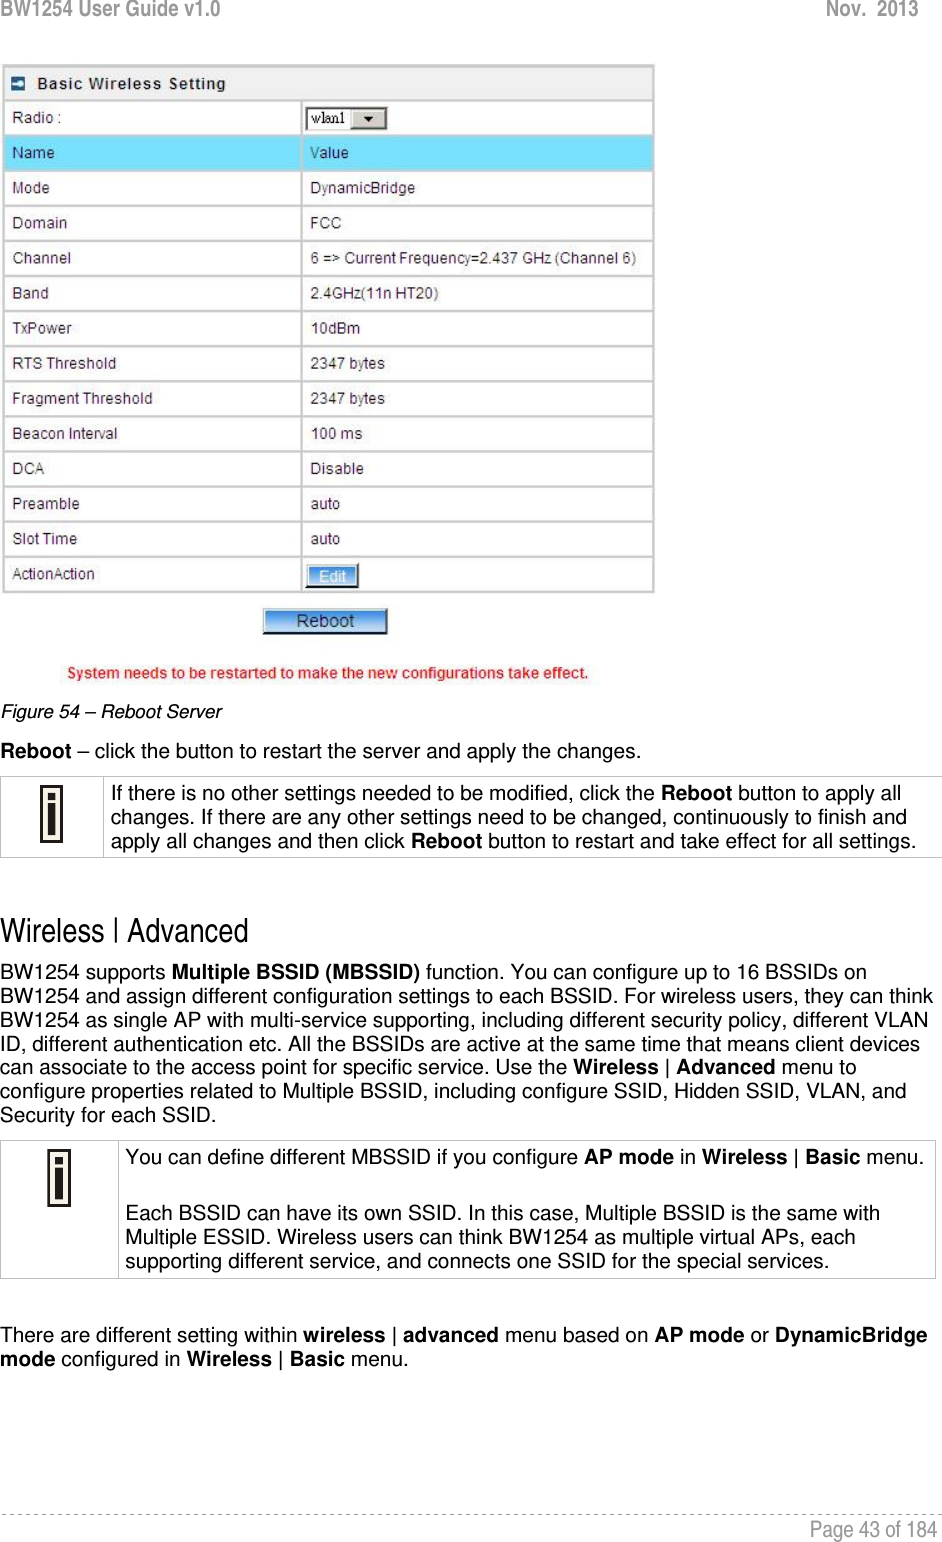 BW1254 User Guide v1.0  Nov.  2013     Page 43 of 184    Figure 54 – Reboot Server Reboot – click the button to restart the server and apply the changes.  If there is no other settings needed to be modified, click the Reboot button to apply all changes. If there are any other settings need to be changed, continuously to finish and apply all changes and then click Reboot button to restart and take effect for all settings.  Wireless | Advanced  BW1254 supports Multiple BSSID (MBSSID) function. You can configure up to 16 BSSIDs on BW1254 and assign different configuration settings to each BSSID. For wireless users, they can think BW1254 as single AP with multi-service supporting, including different security policy, different VLAN ID, different authentication etc. All the BSSIDs are active at the same time that means client devices can associate to the access point for specific service. Use the Wireless | Advanced menu to configure properties related to Multiple BSSID, including configure SSID, Hidden SSID, VLAN, and Security for each SSID.  You can define different MBSSID if you configure AP mode in Wireless | Basic menu. Each BSSID can have its own SSID. In this case, Multiple BSSID is the same with Multiple ESSID. Wireless users can think BW1254 as multiple virtual APs, each supporting different service, and connects one SSID for the special services.   There are different setting within wireless | advanced menu based on AP mode or DynamicBridge mode configured in Wireless | Basic menu.   